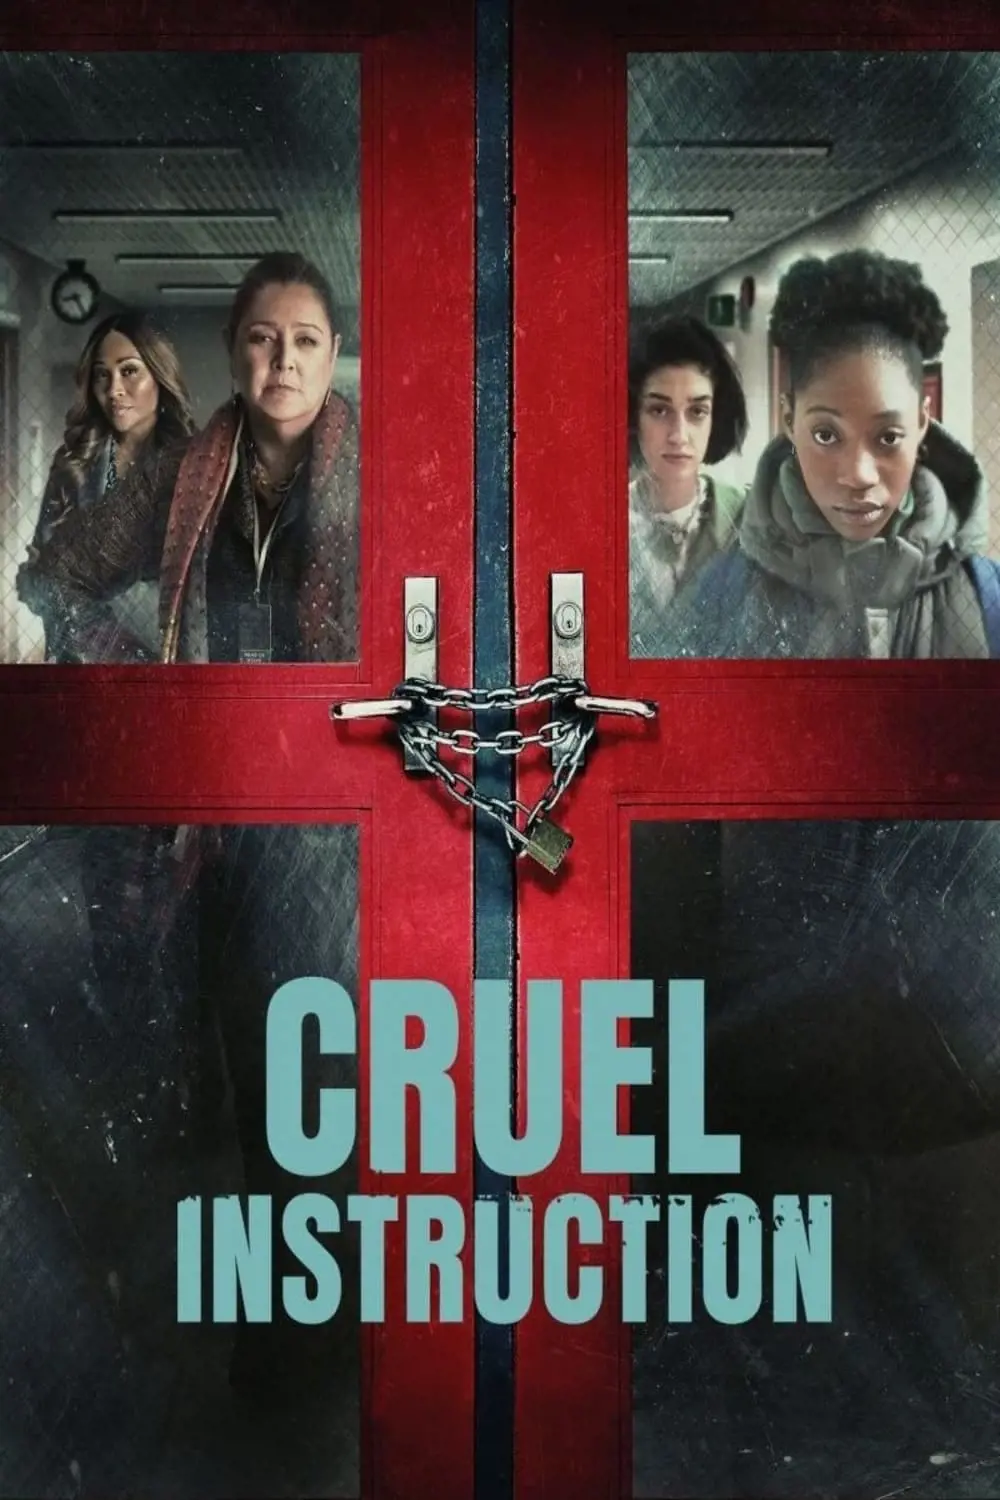 Cruel Instruction is the story of a 16-year-old Kayla Adams